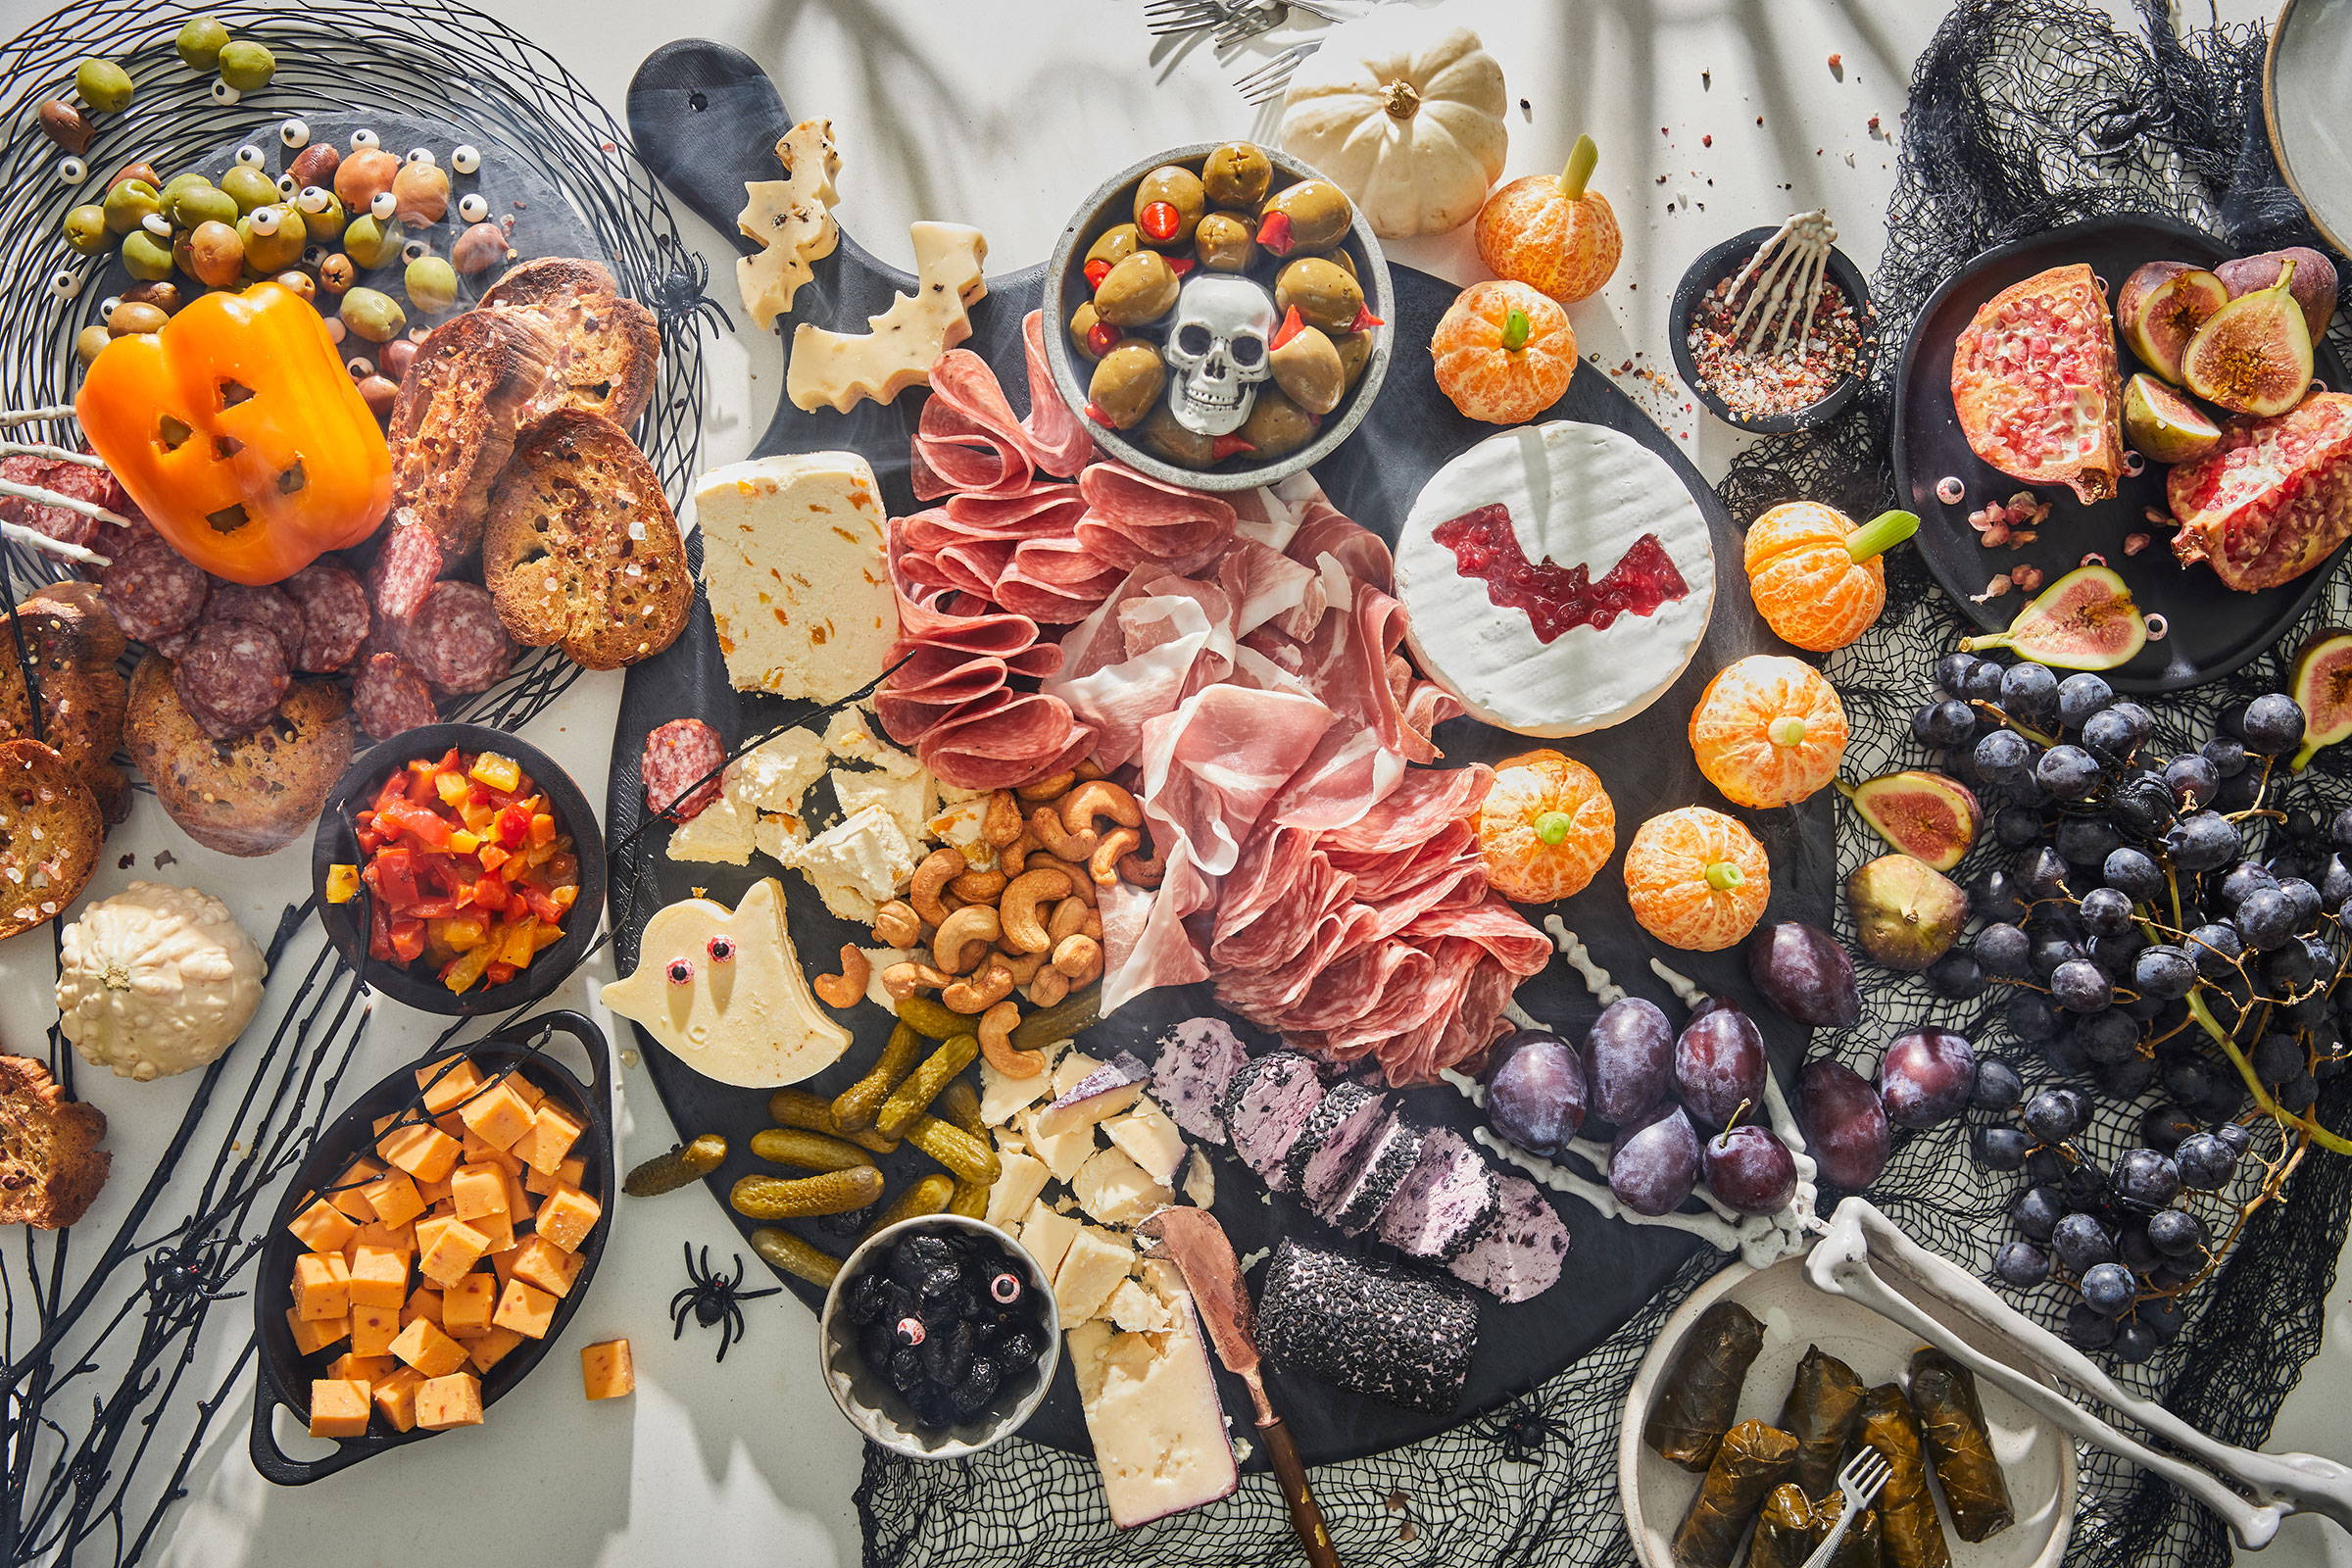 A spooky fun charcuterie spread that is frighteningly delicious!